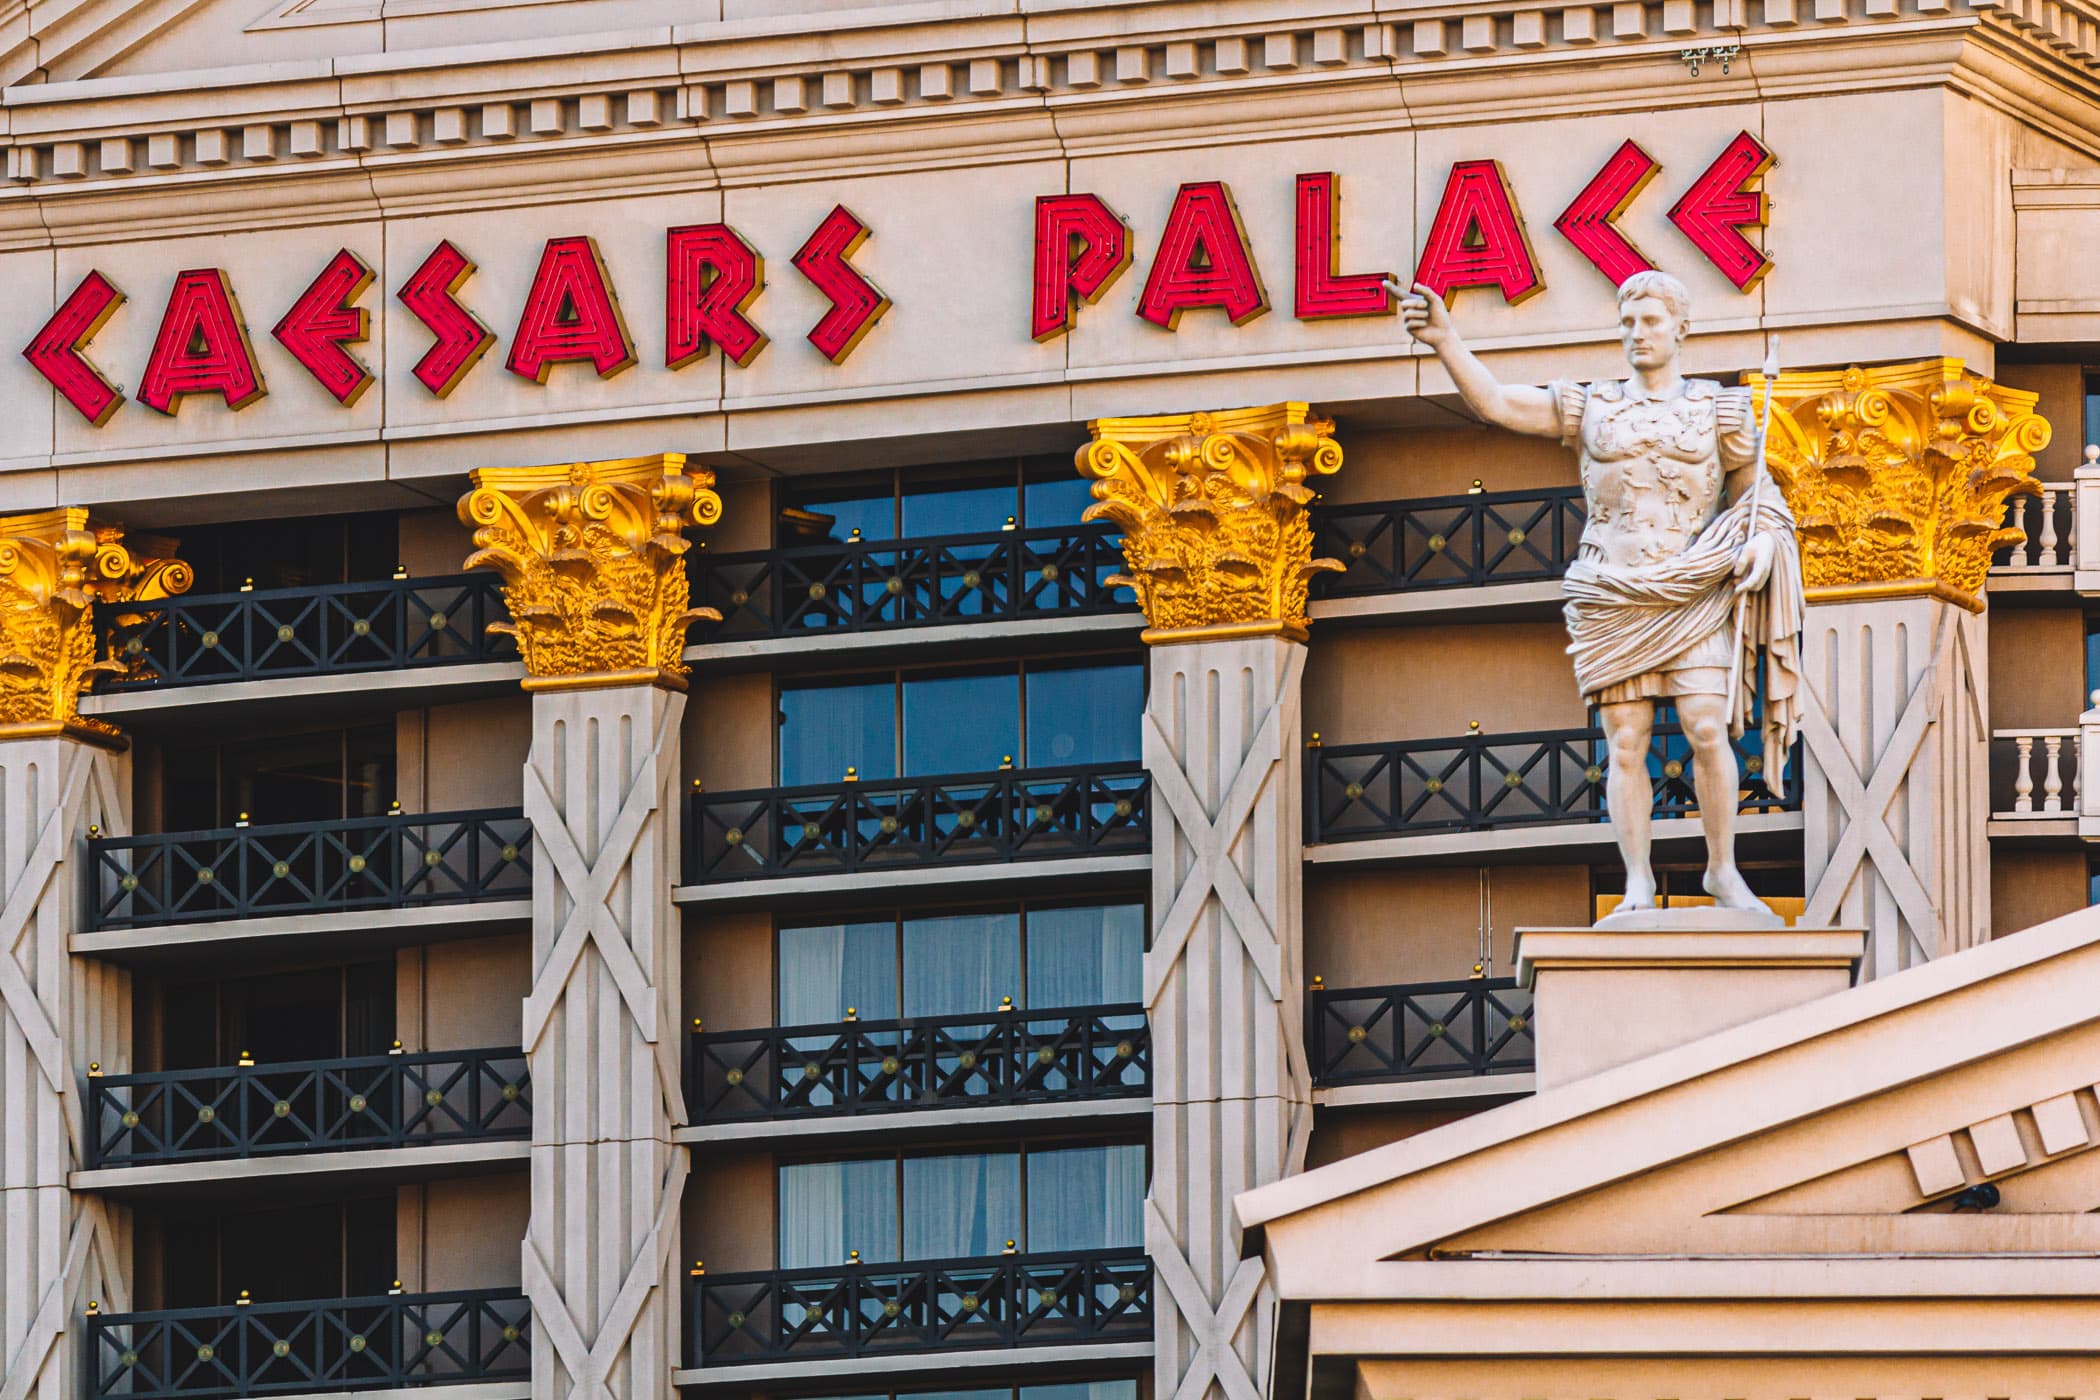 A statue outside of Las Vegas' Caesars Palace seems to point at the resort's sign on one of its guest room towers.